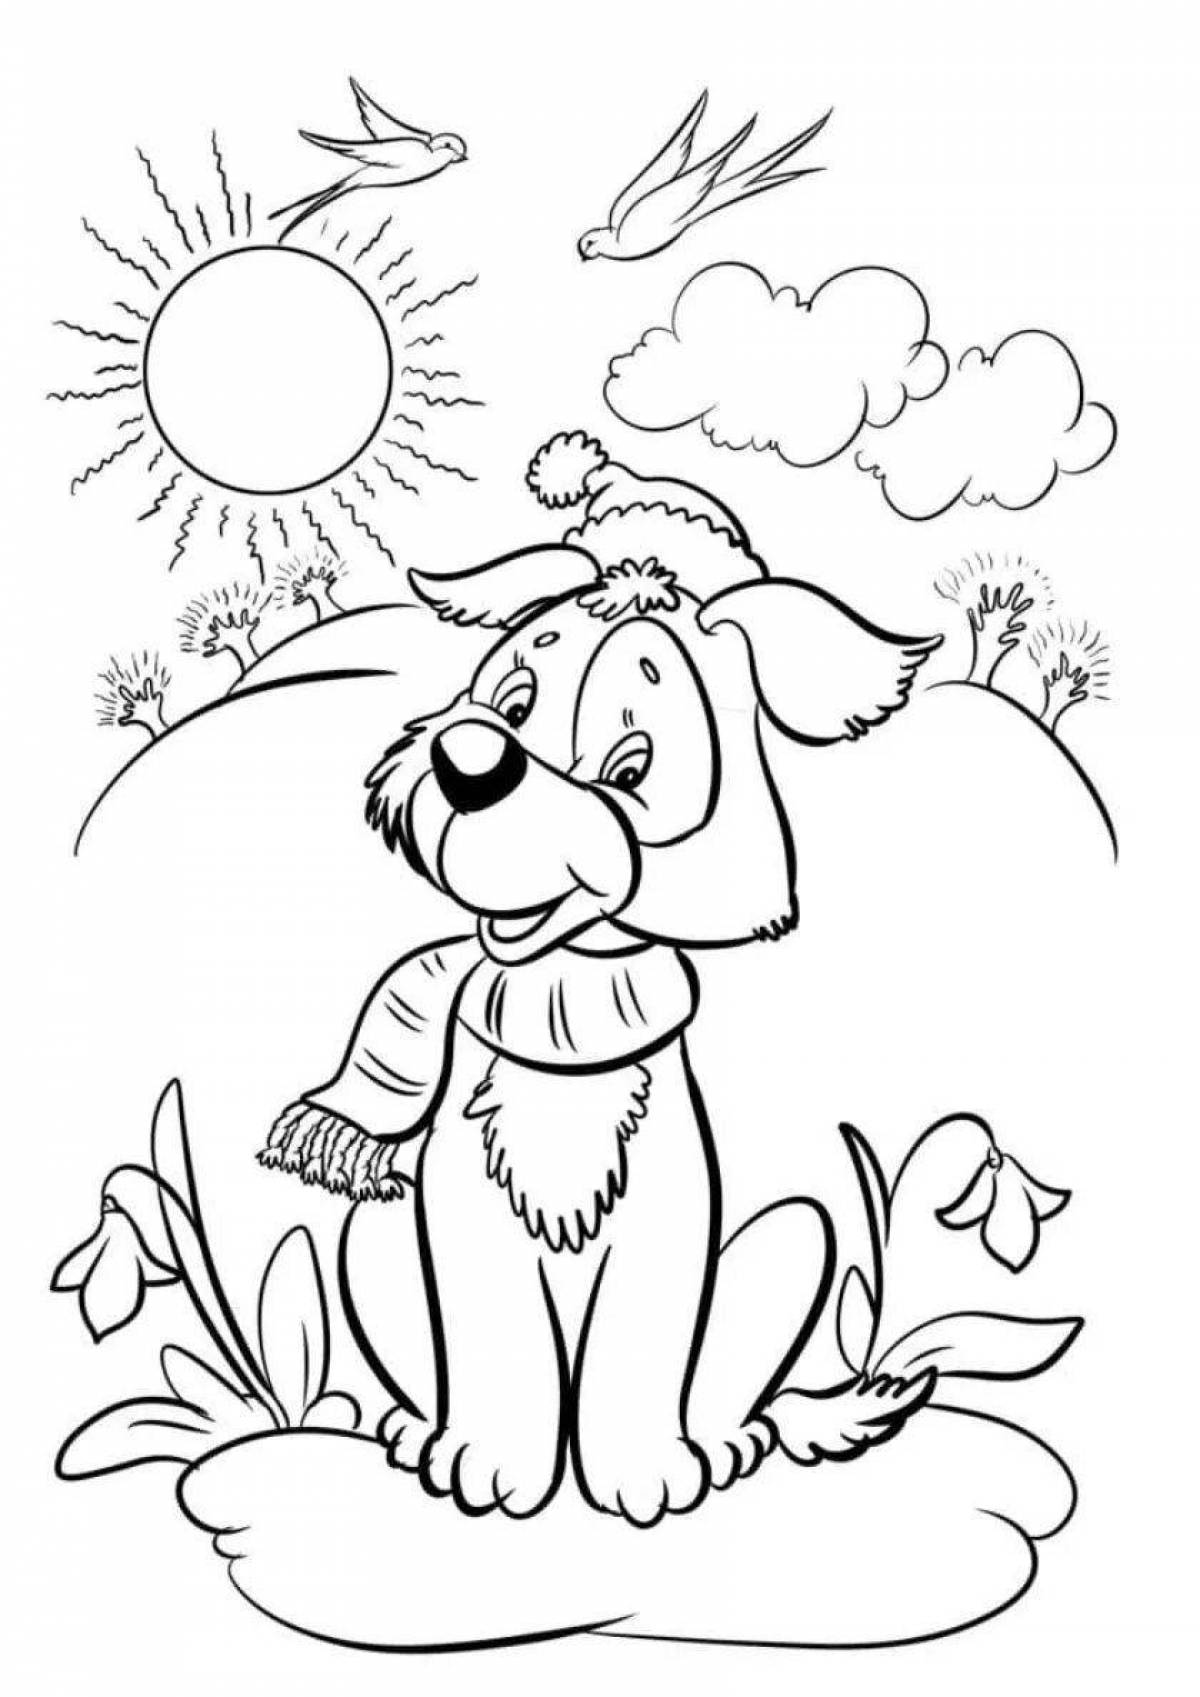 Sunny spring coloring book for 3-4 year olds